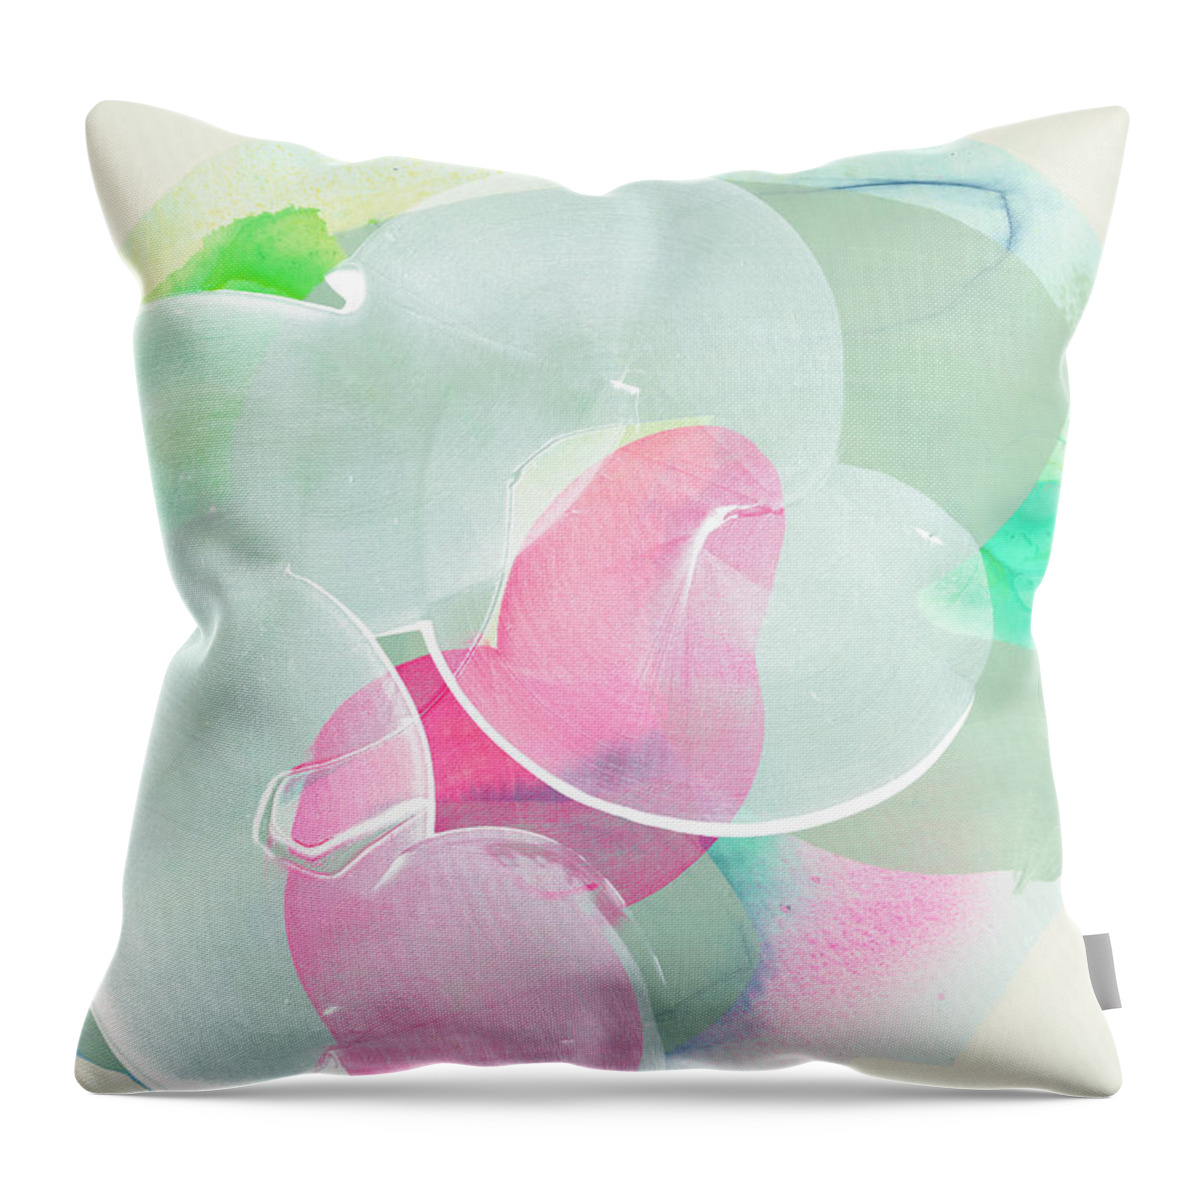 Abstract Throw Pillow featuring the painting Sensitive, Once Upon a Time by Claire Desjardins